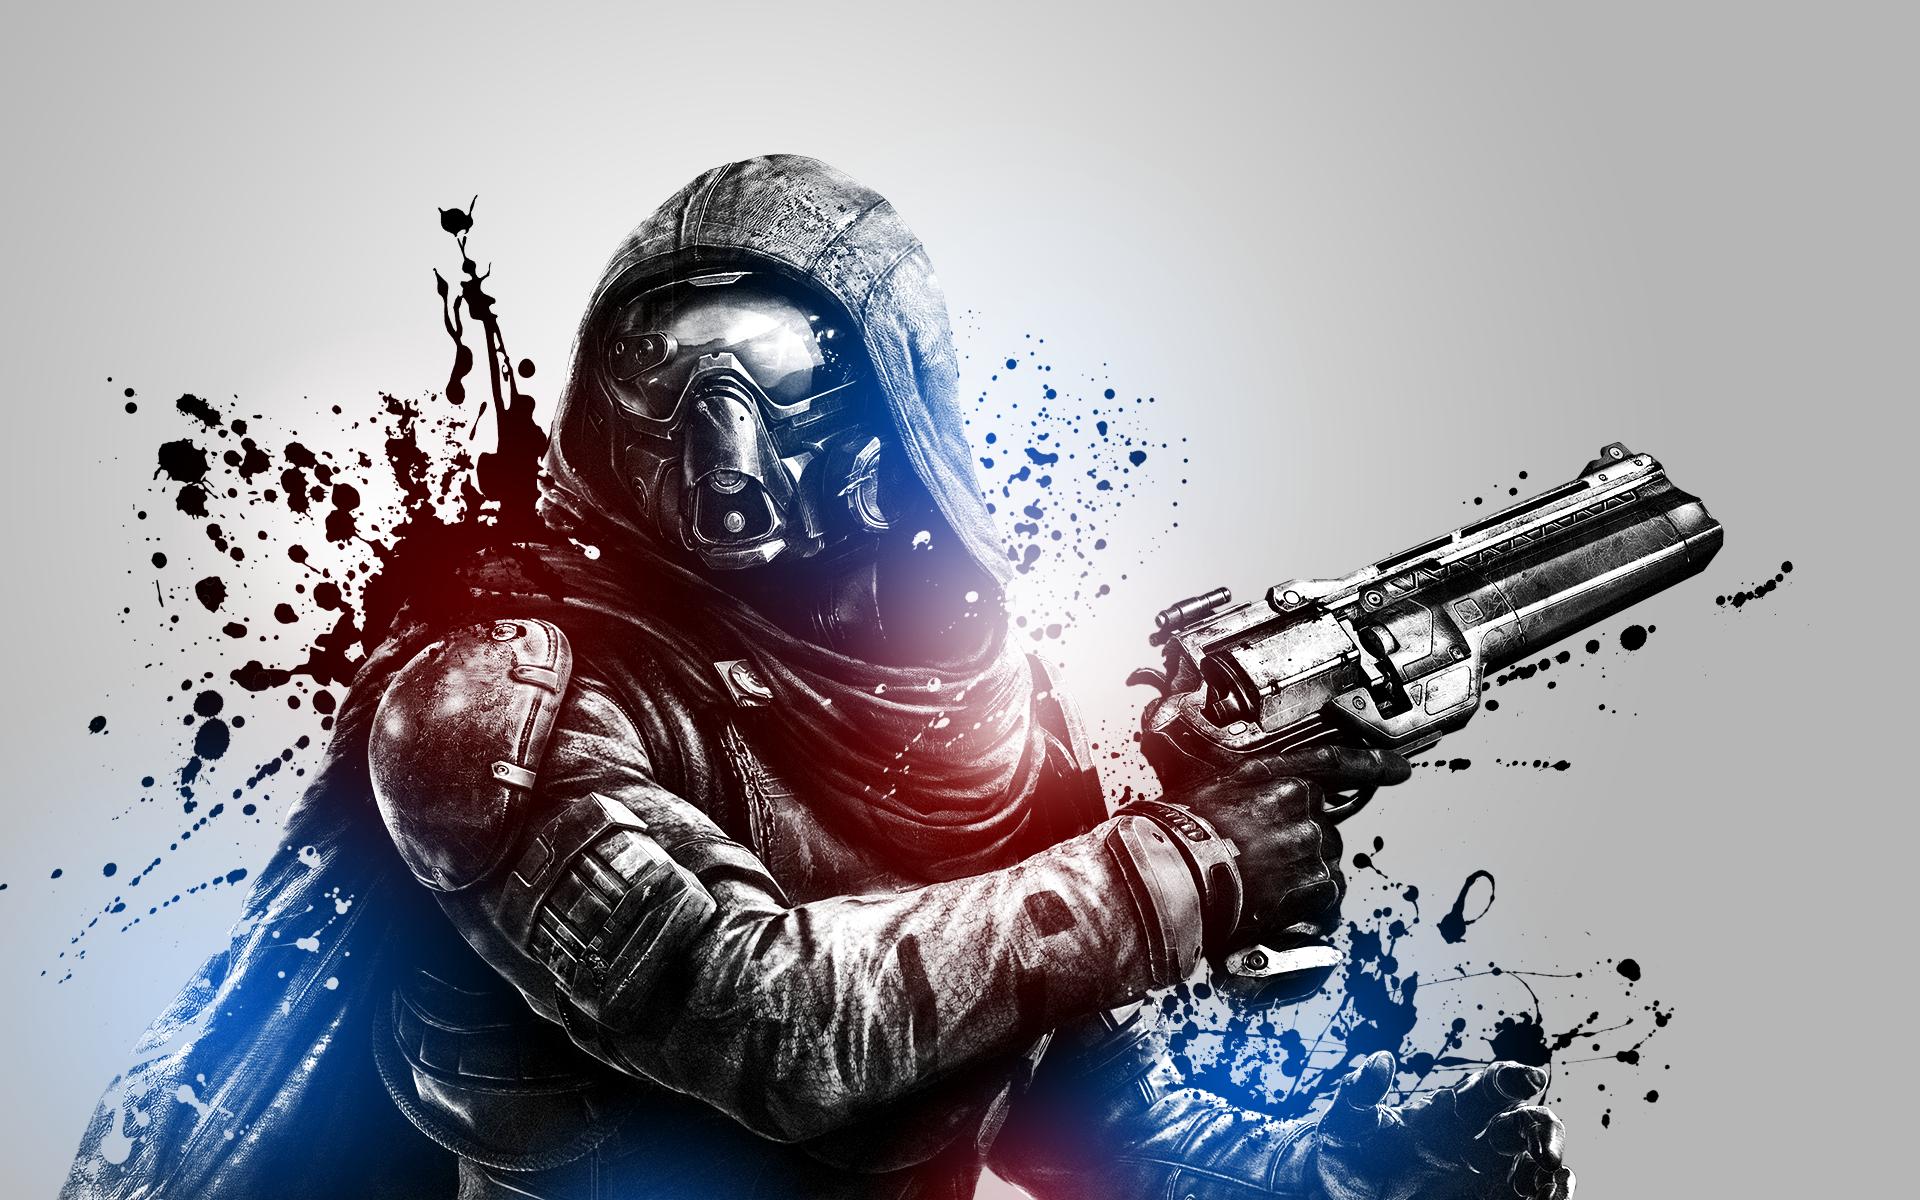 cool destiny wallpapers,graphic design,fictional character,illustration,pc game,games